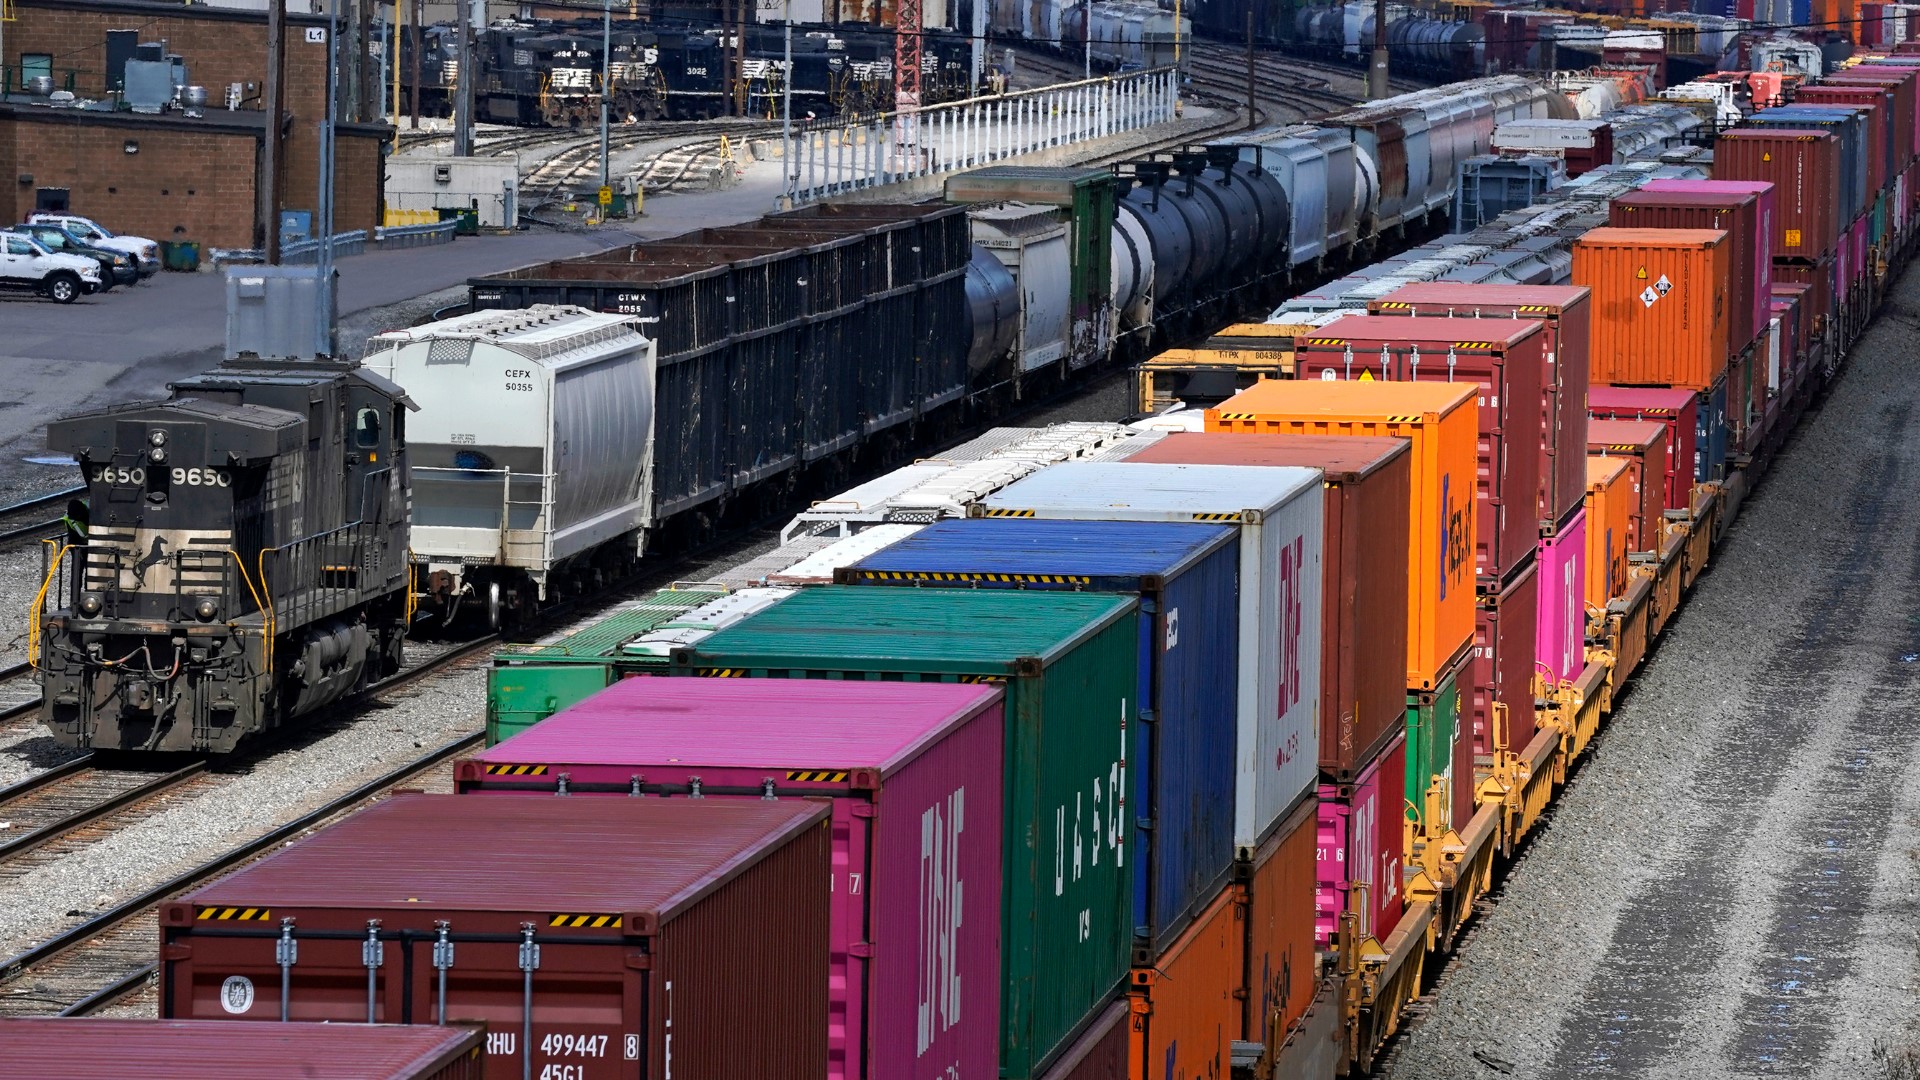 All 12 railroad unions must approve the contracts to prevent a strike that could cripple supply chains and hamper a stressed U.S. economy just before the holidays.